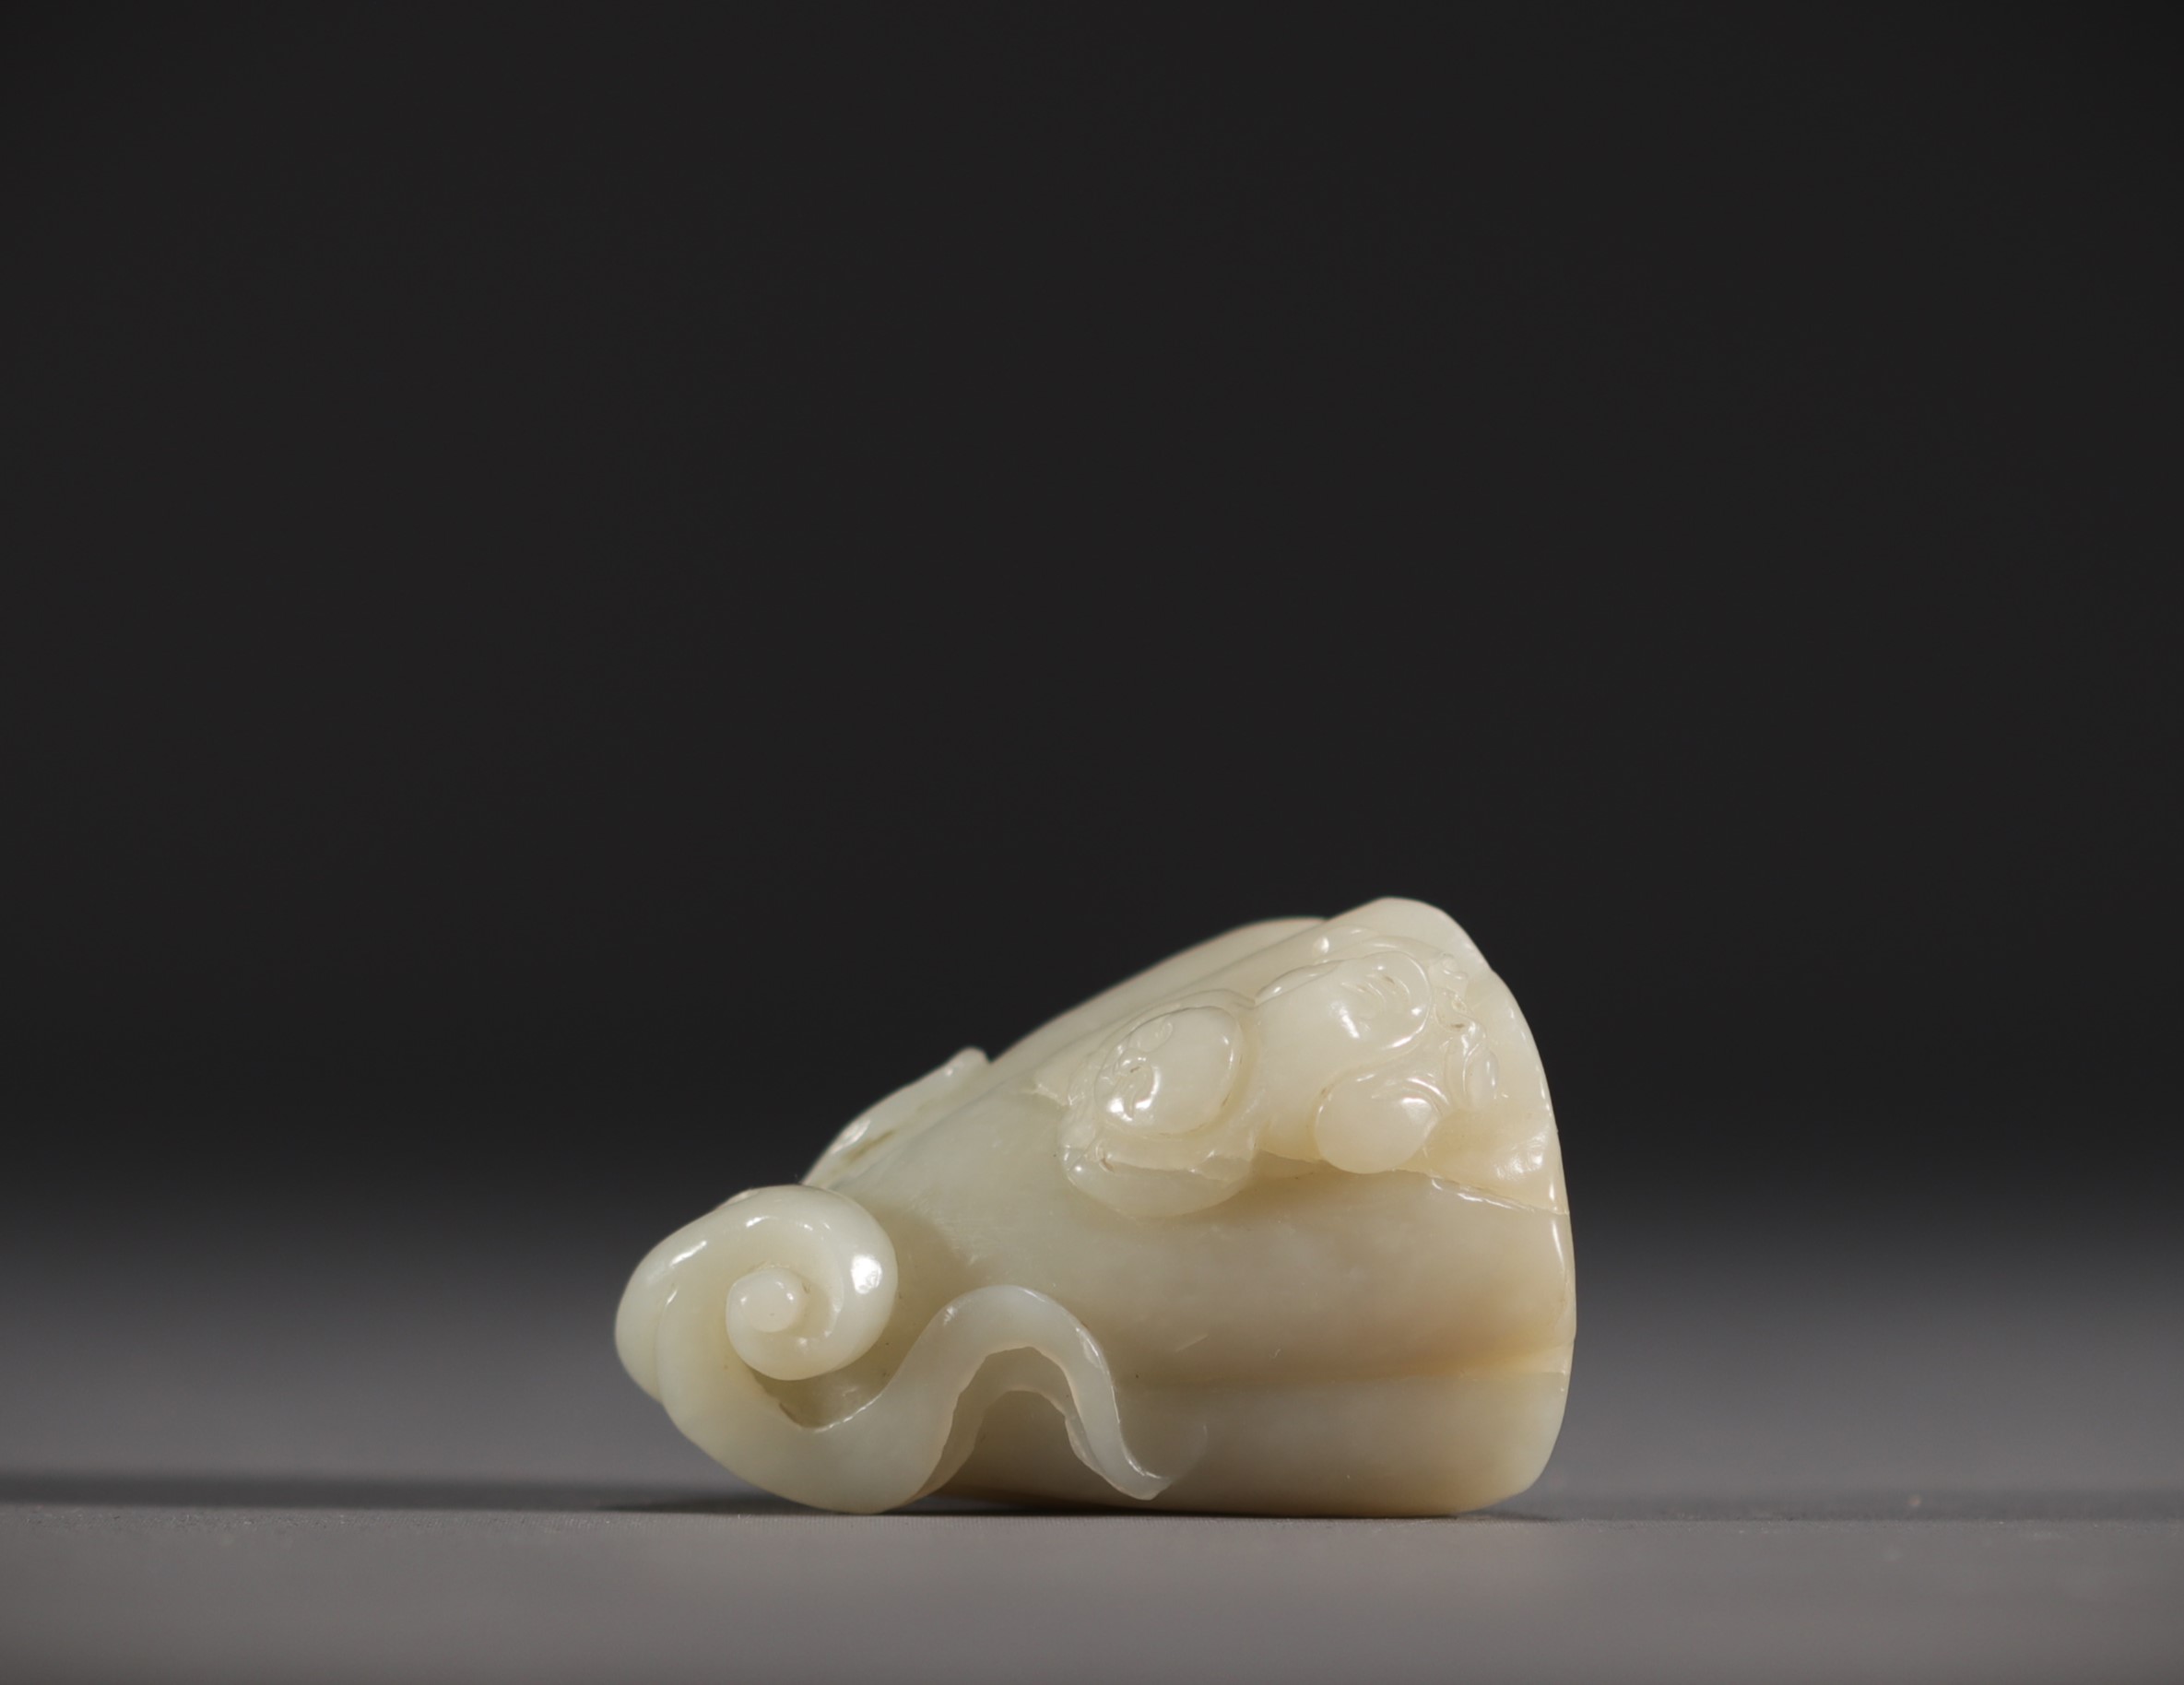 China - White jade pendant in the shape of a fruit surmounted by a young child. - Image 3 of 6